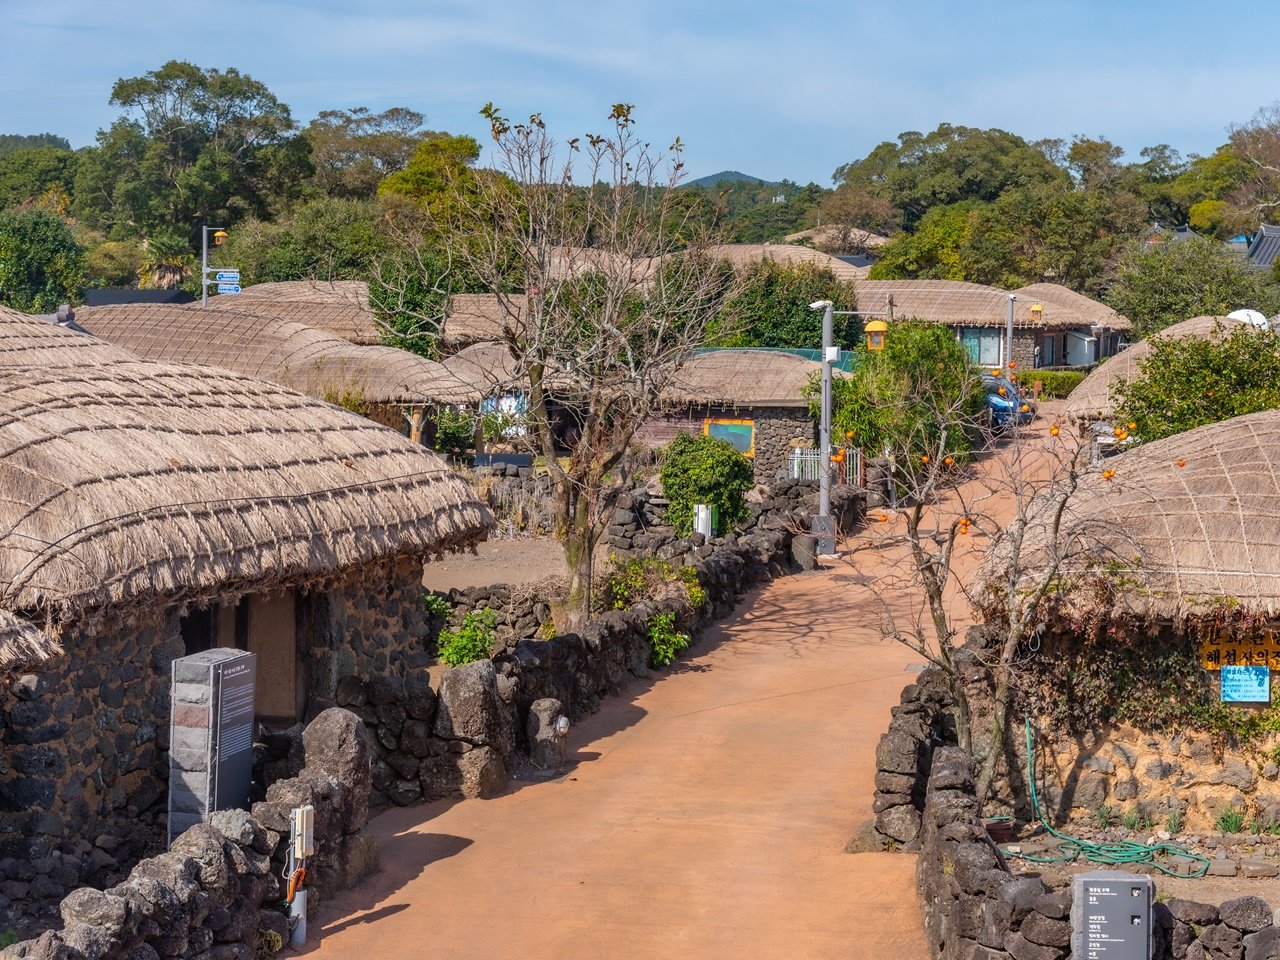 Houses made of lava rocks and thatch at Seongeup Folk Village